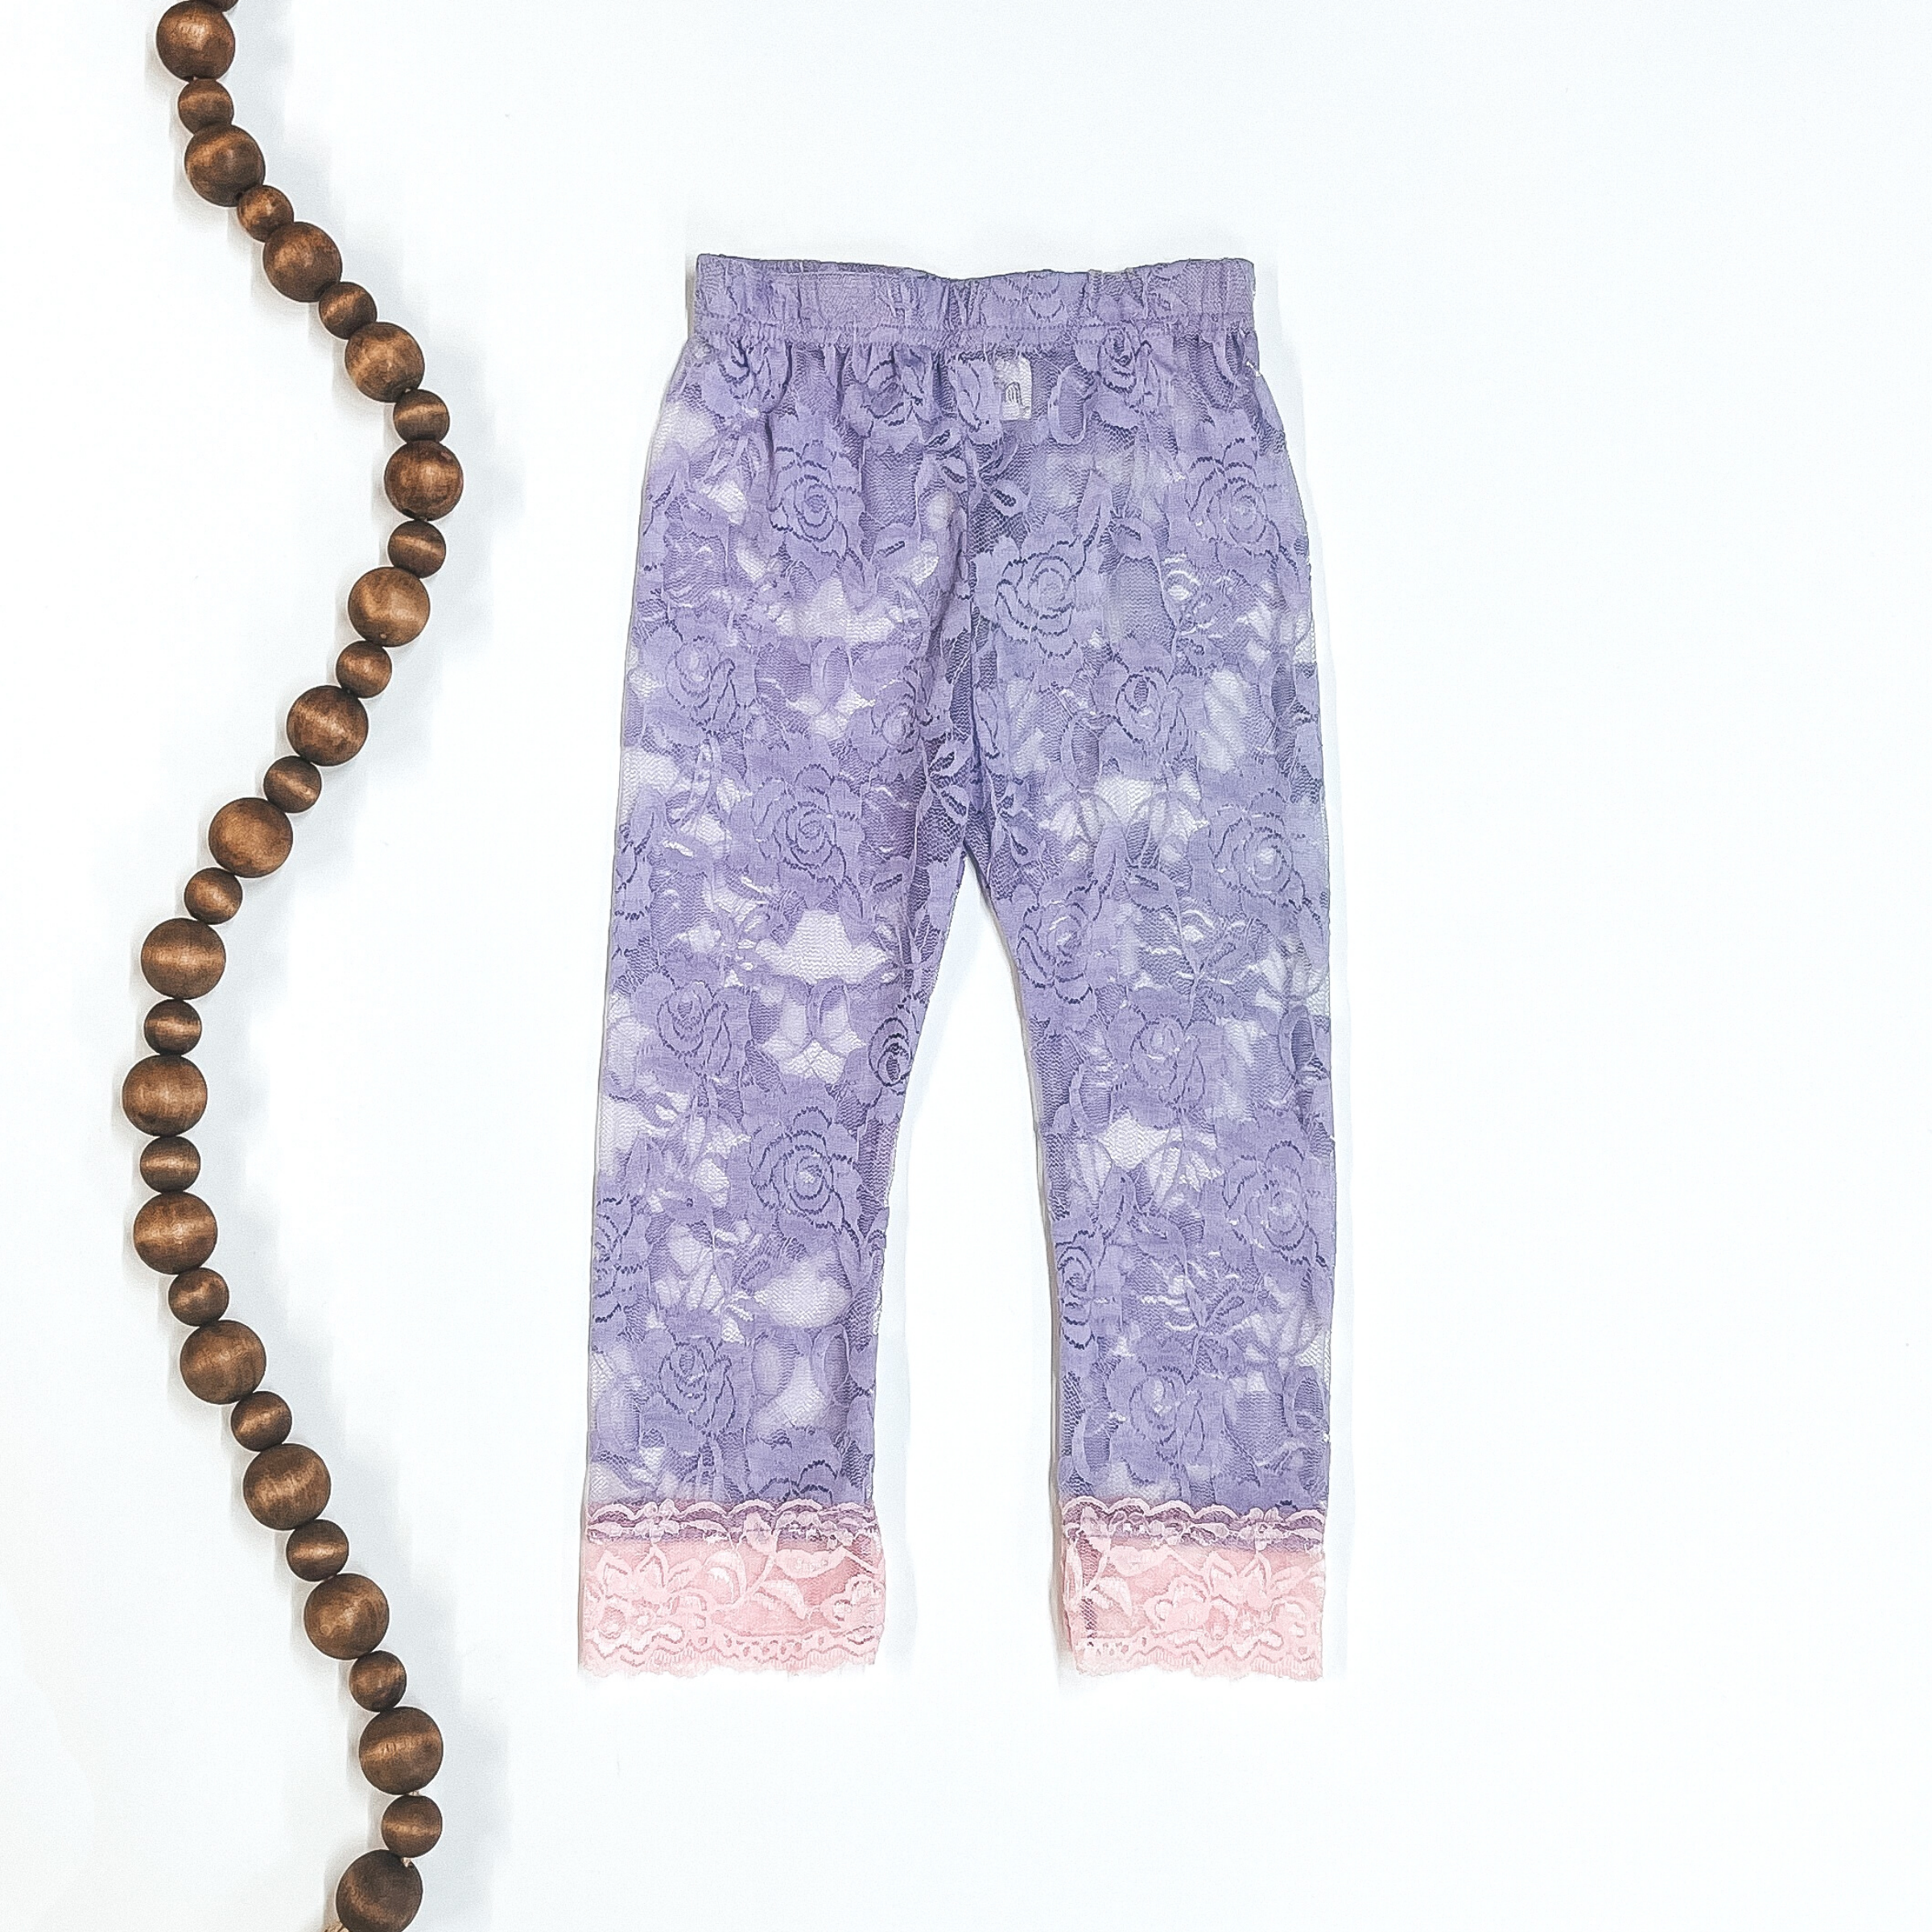 Last Chance Size Toddler Medium | Children's Lace Leggings in Purple with Light Pink Hem | ONLY 1 LEFT! - Giddy Up Glamour Boutique